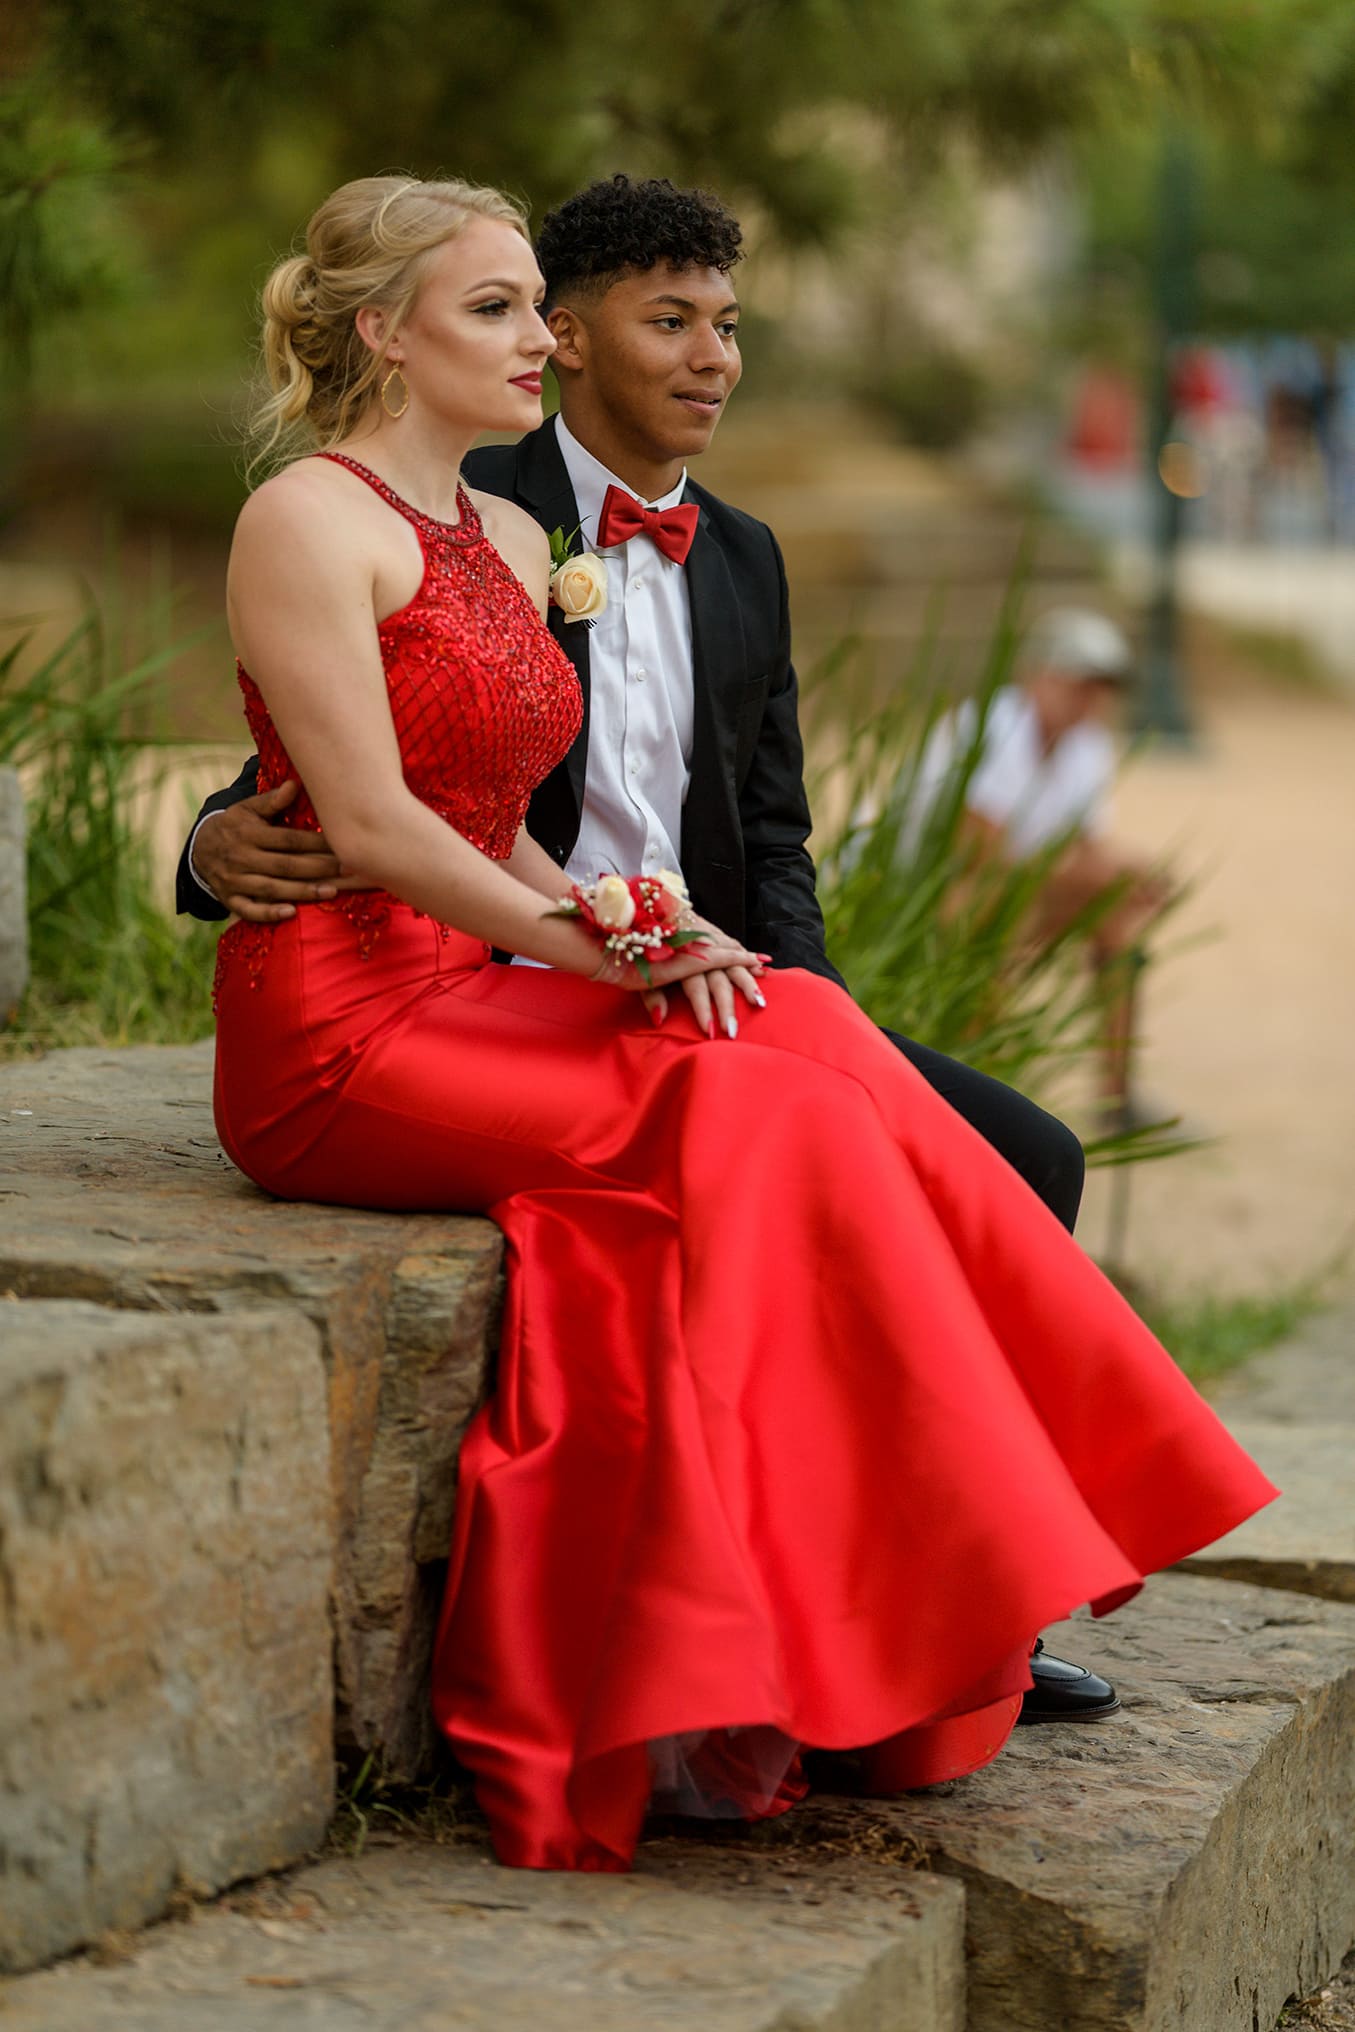 Buy Prom Couple Red Dress In Stock